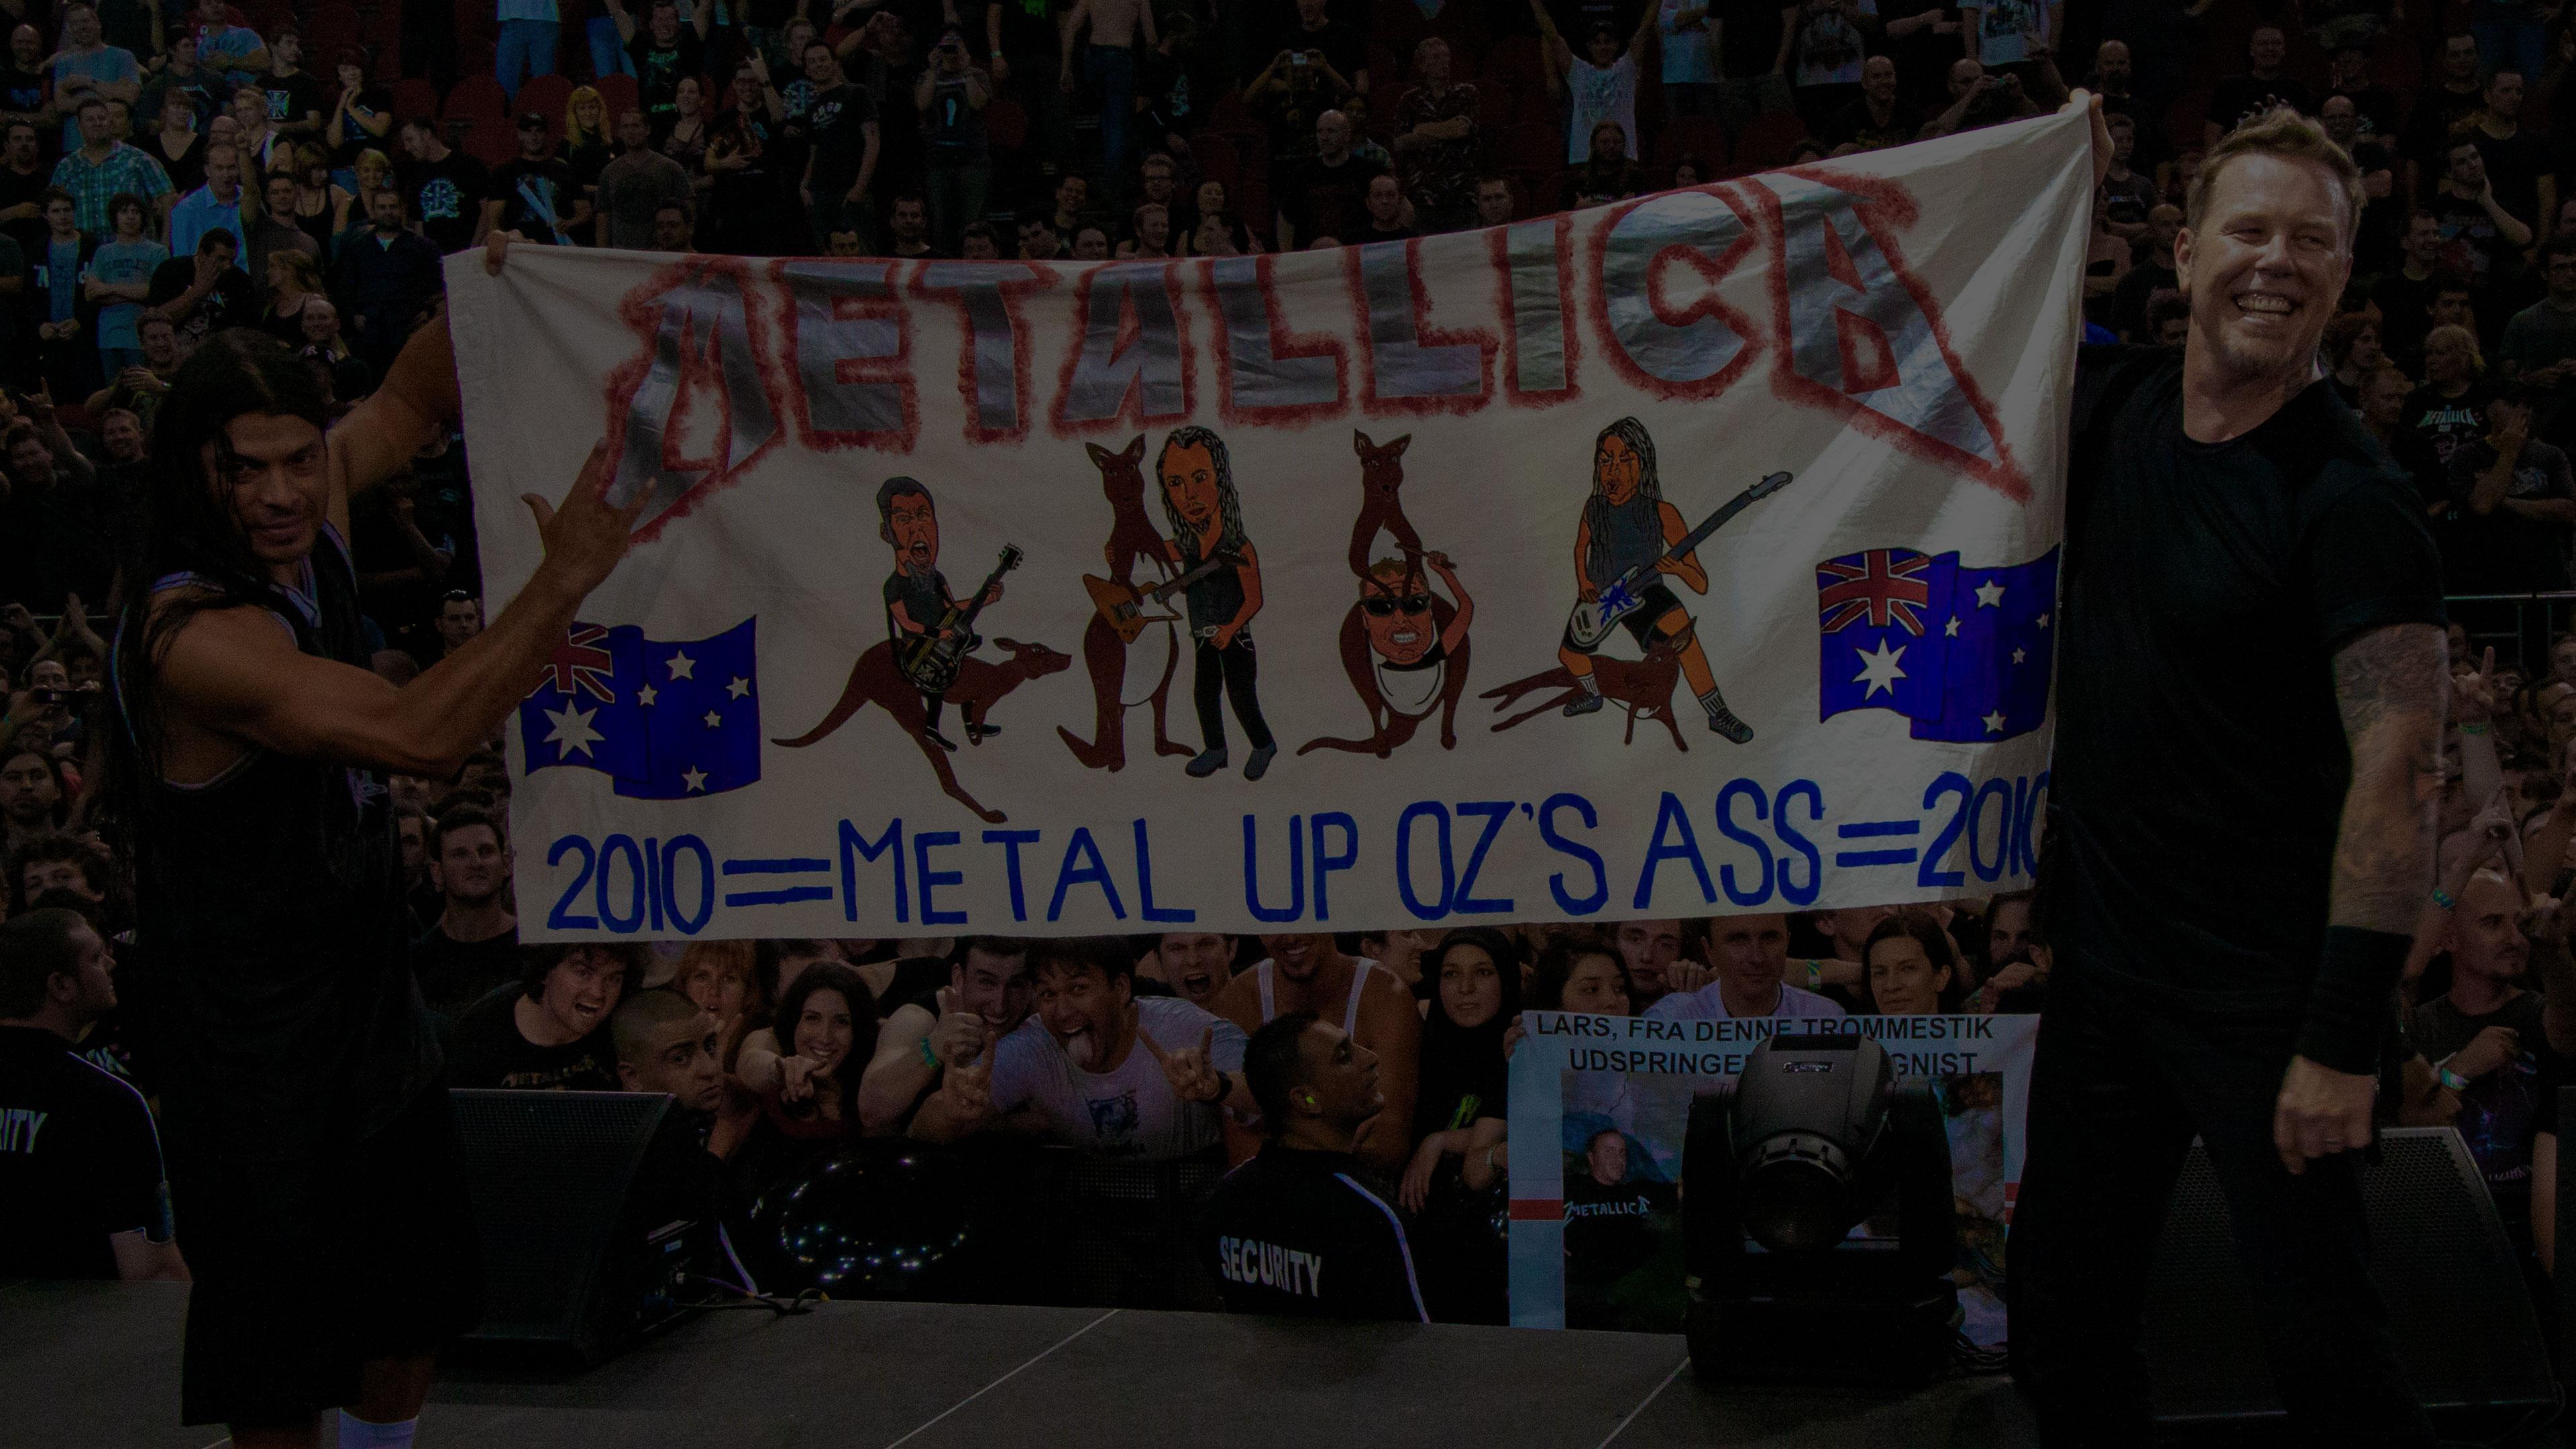 Banner Image for the photo gallery from the gig in Sydney, Australia shot on November 10, 2010